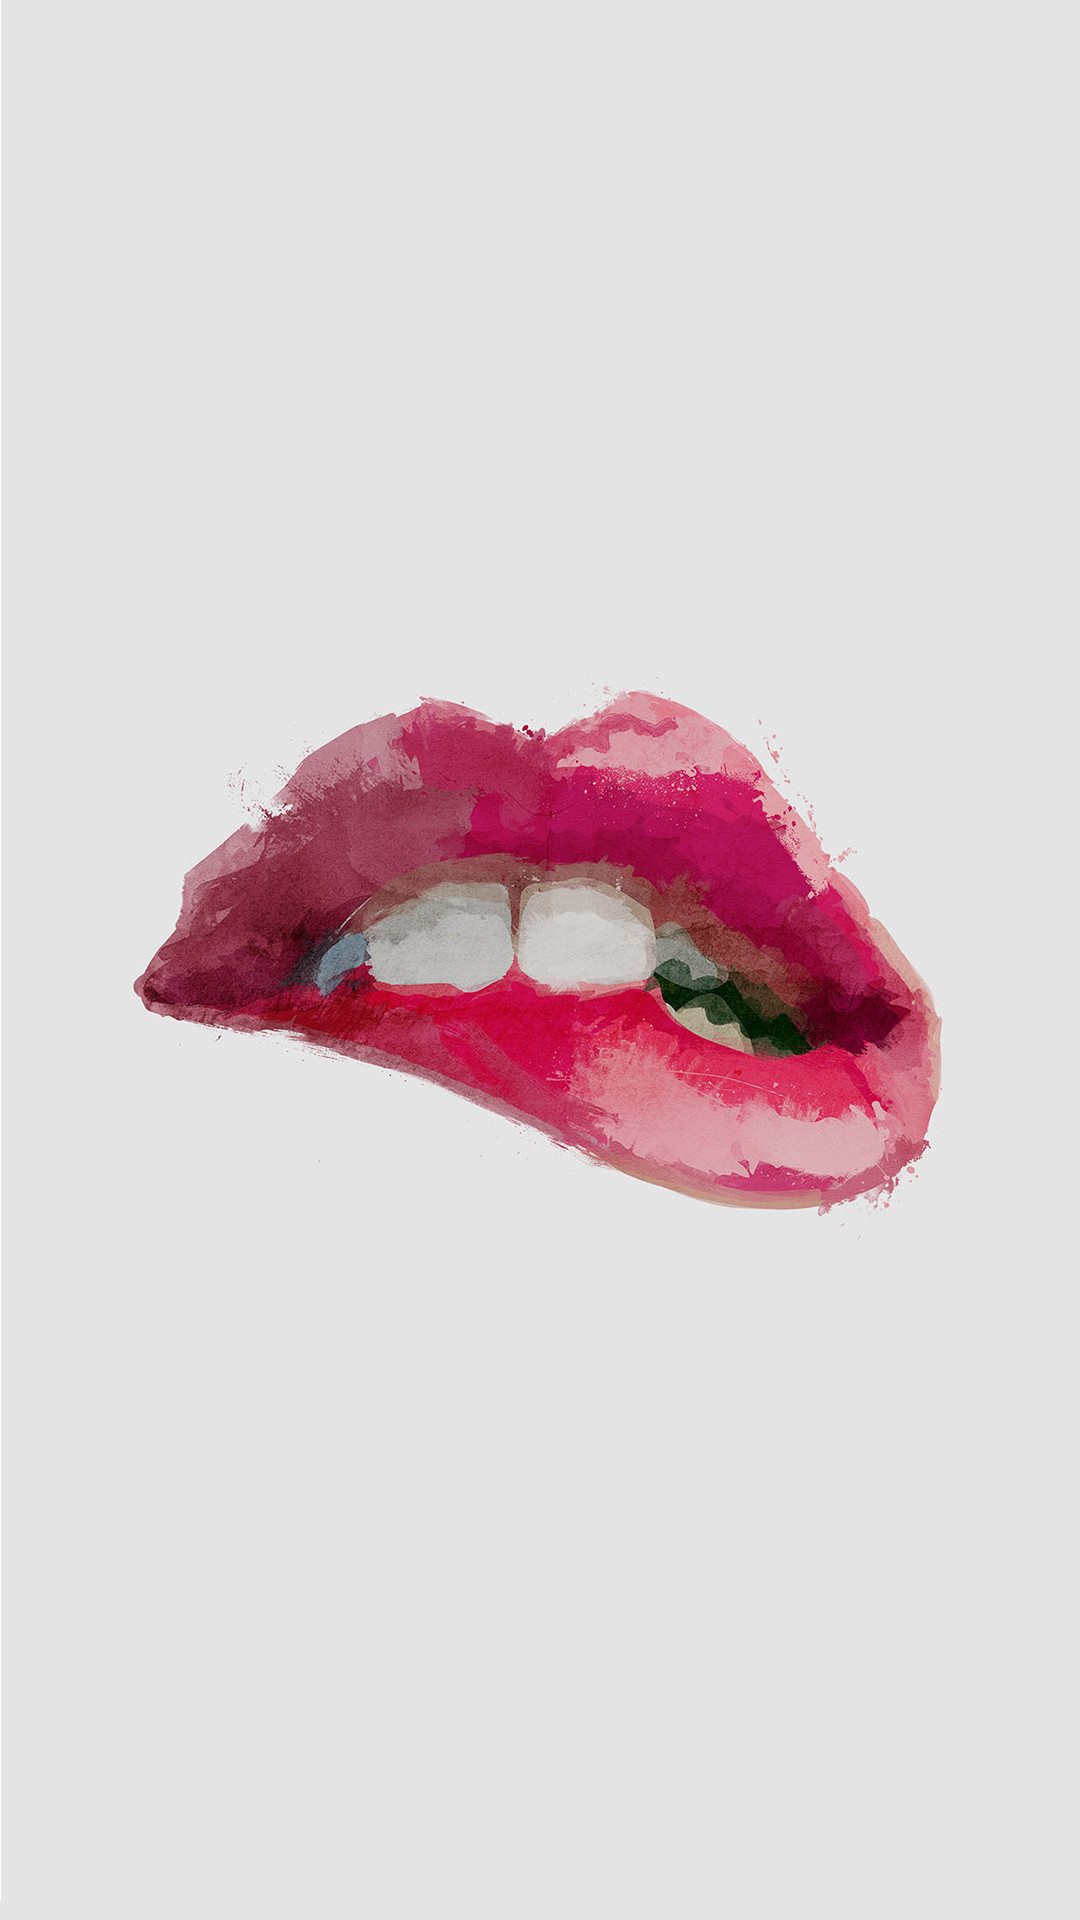 1080x1920 Red Lips Biting Illustration iPhone 6+ HD Wallpaper -  http://freebestpicture.